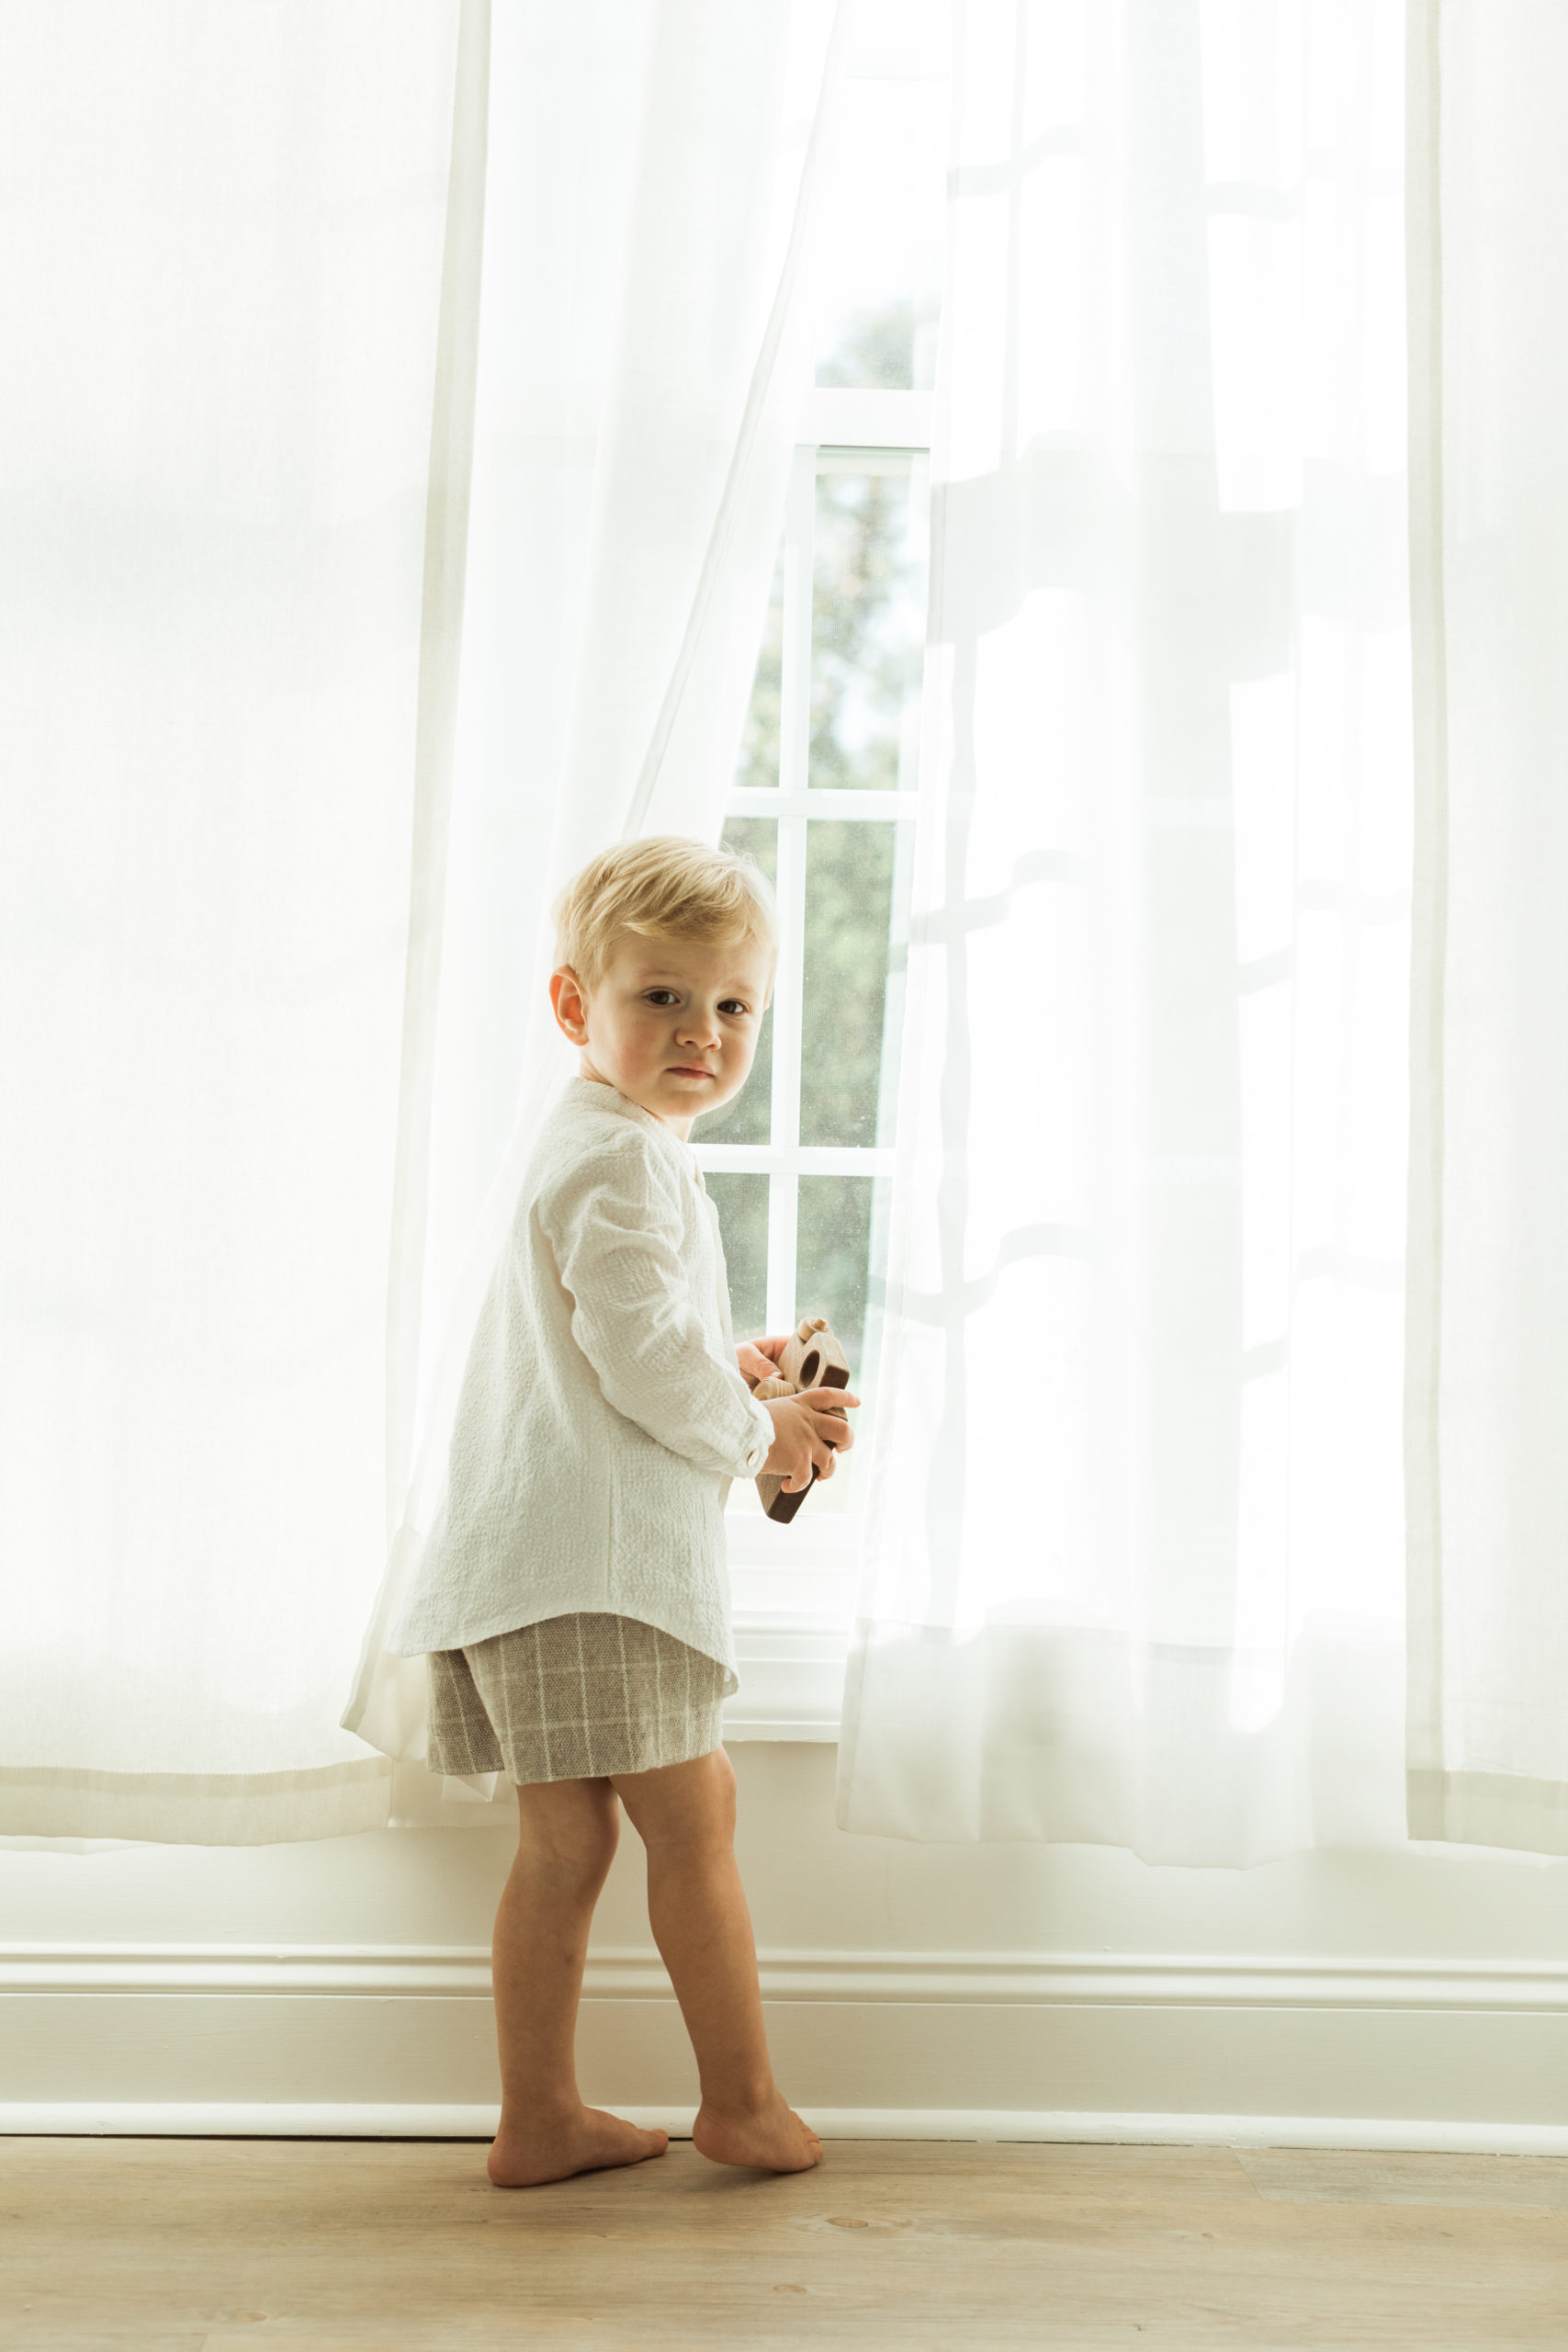 Little boy standing near window. White curtains and white walls. Little boy wearing tan shorts and white button up.